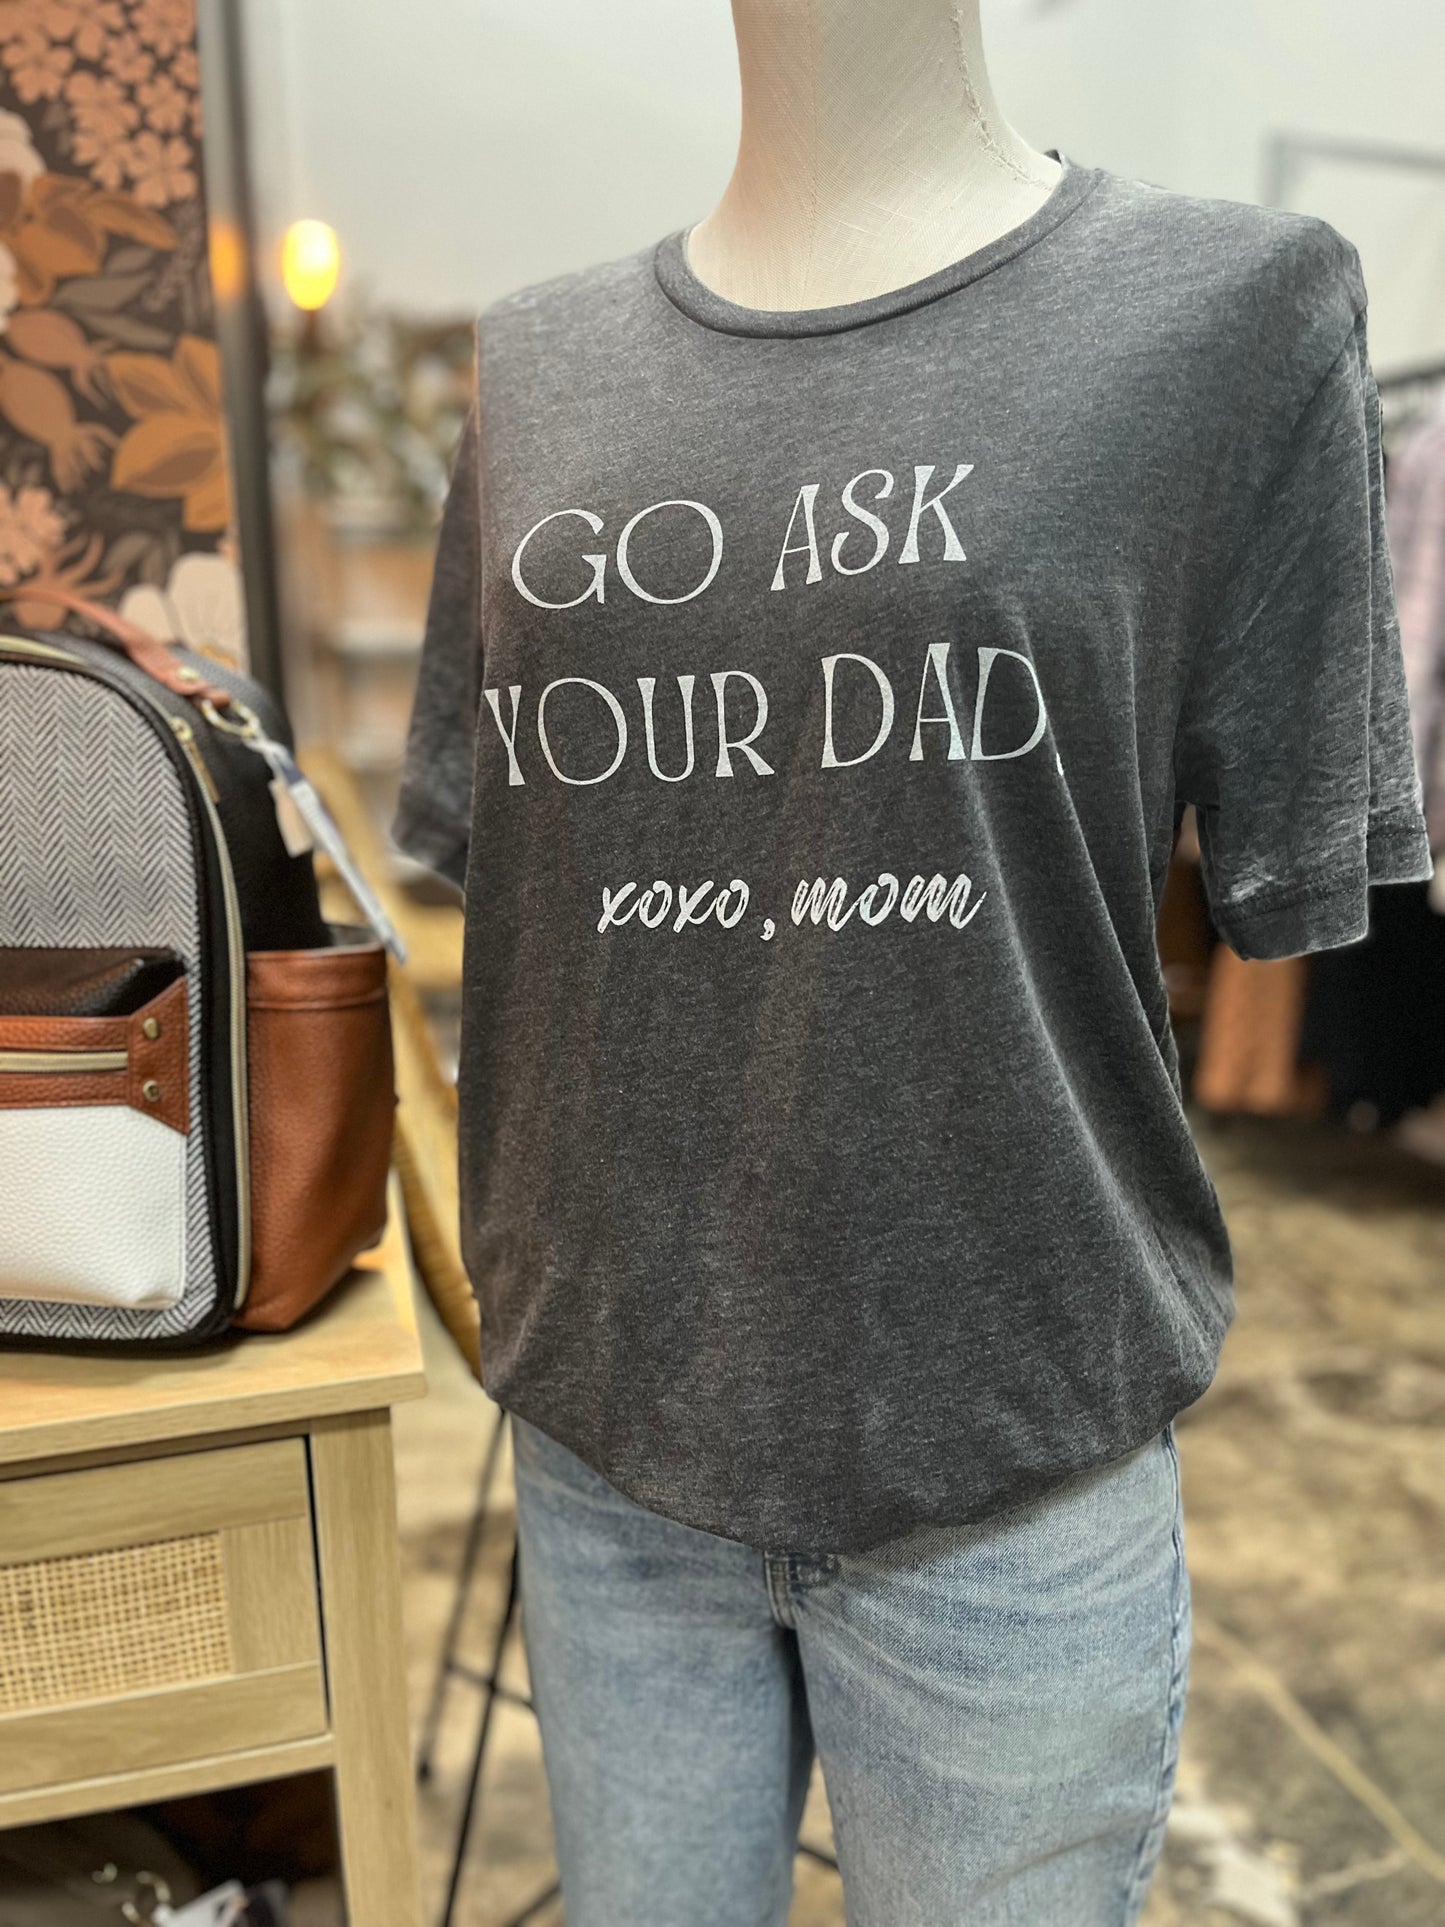 Go Ask Your Dad. xoxo, mom T-Shirt